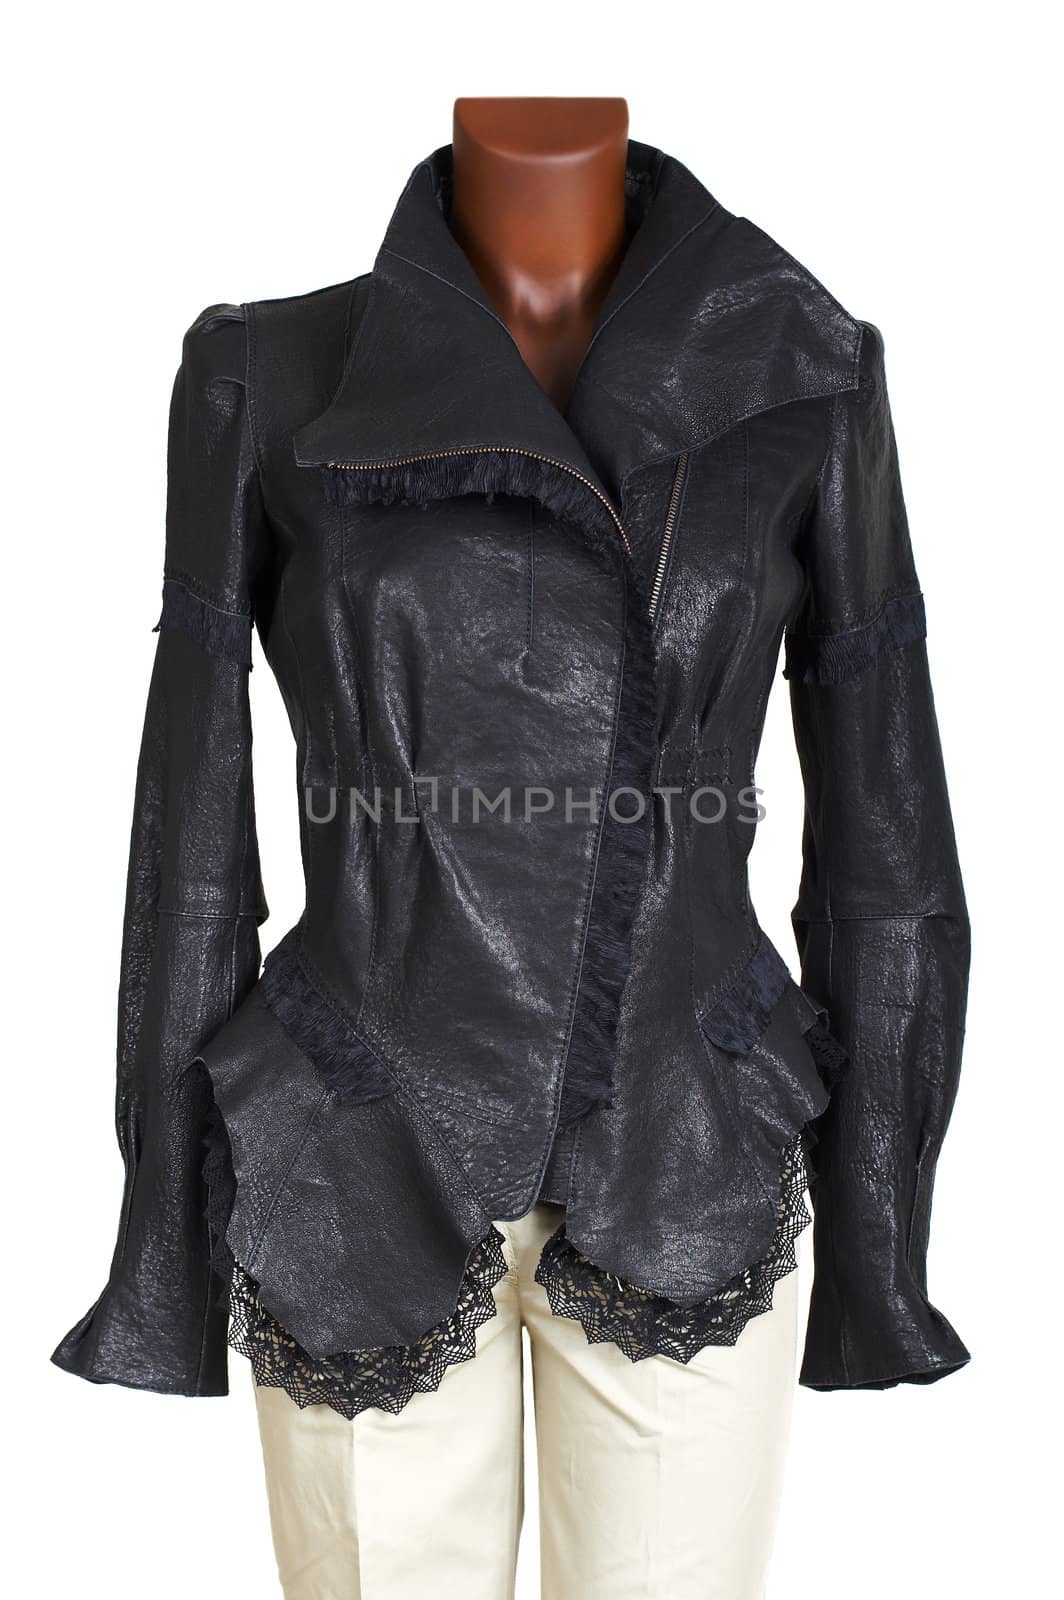 Female leather jacket and trousers on a white background